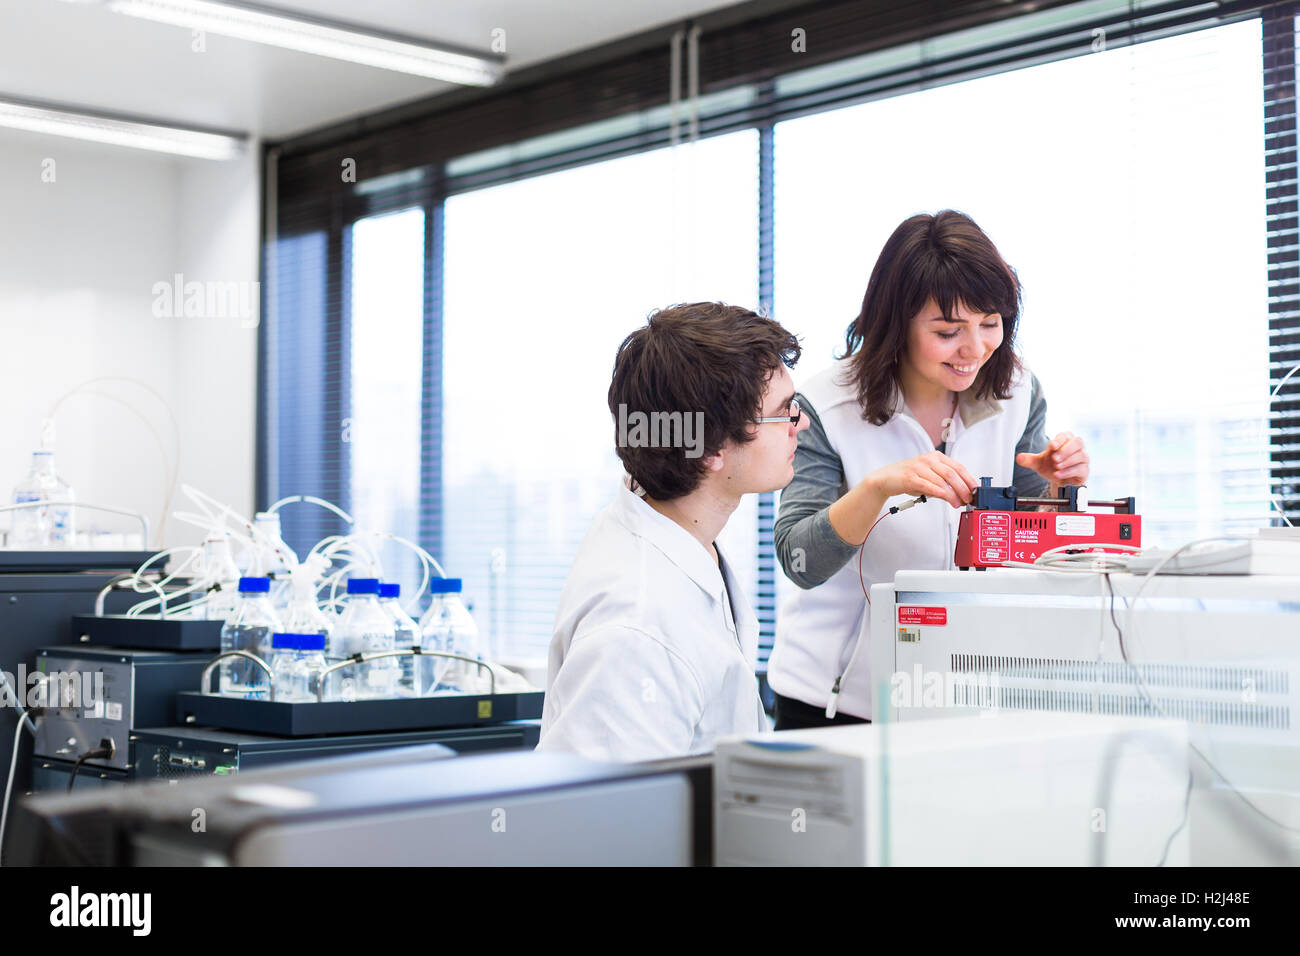 Two young researchers carrying out experiments in a lab Stock Photo